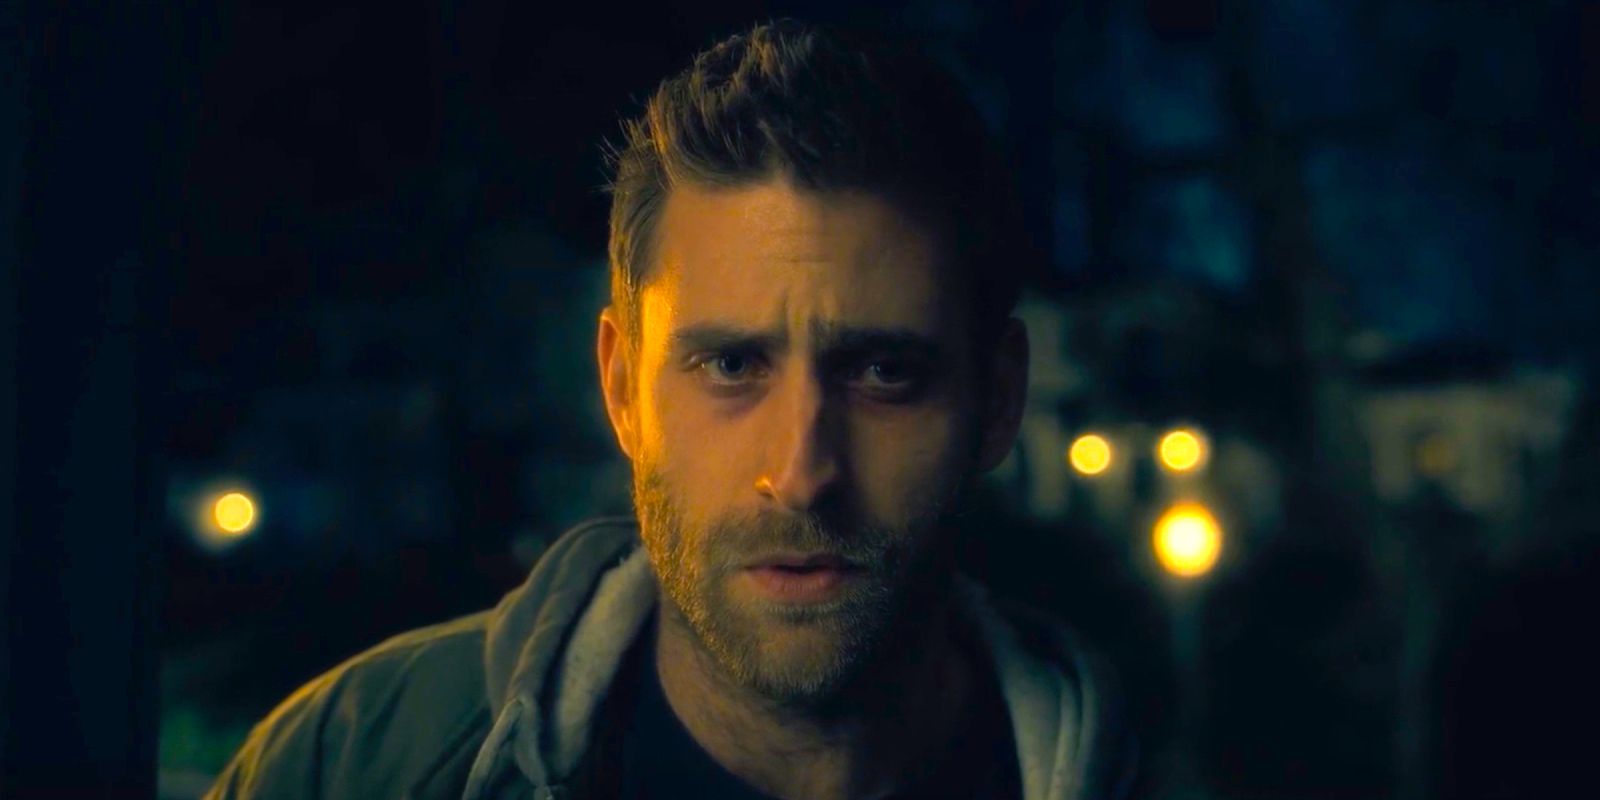 Oliver Jackson-Cohen as Luke standing outside at night looking worried in The Haunting of Hill House episode 4.